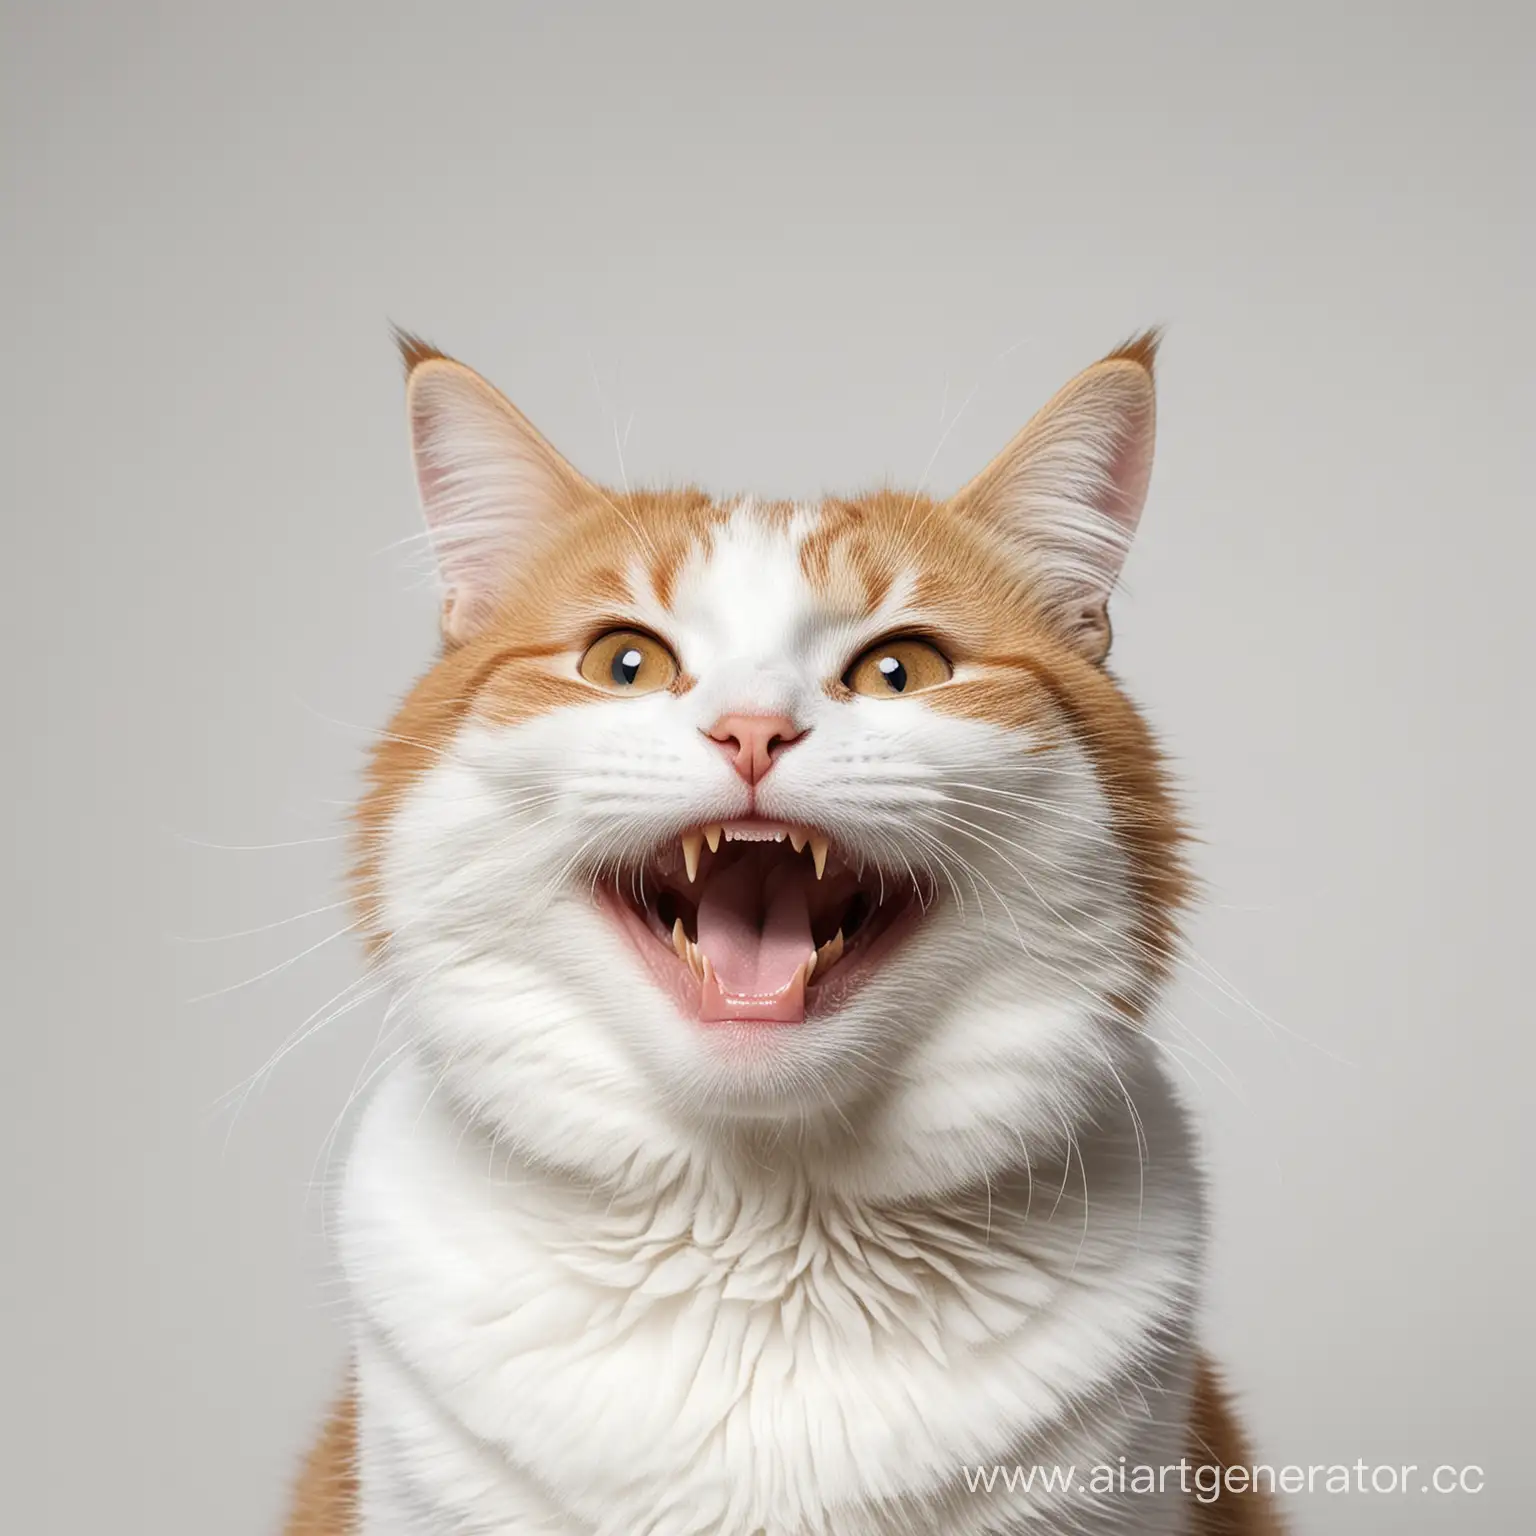 Cheerful-Smiling-Cat-Poses-Happily-Against-White-Background